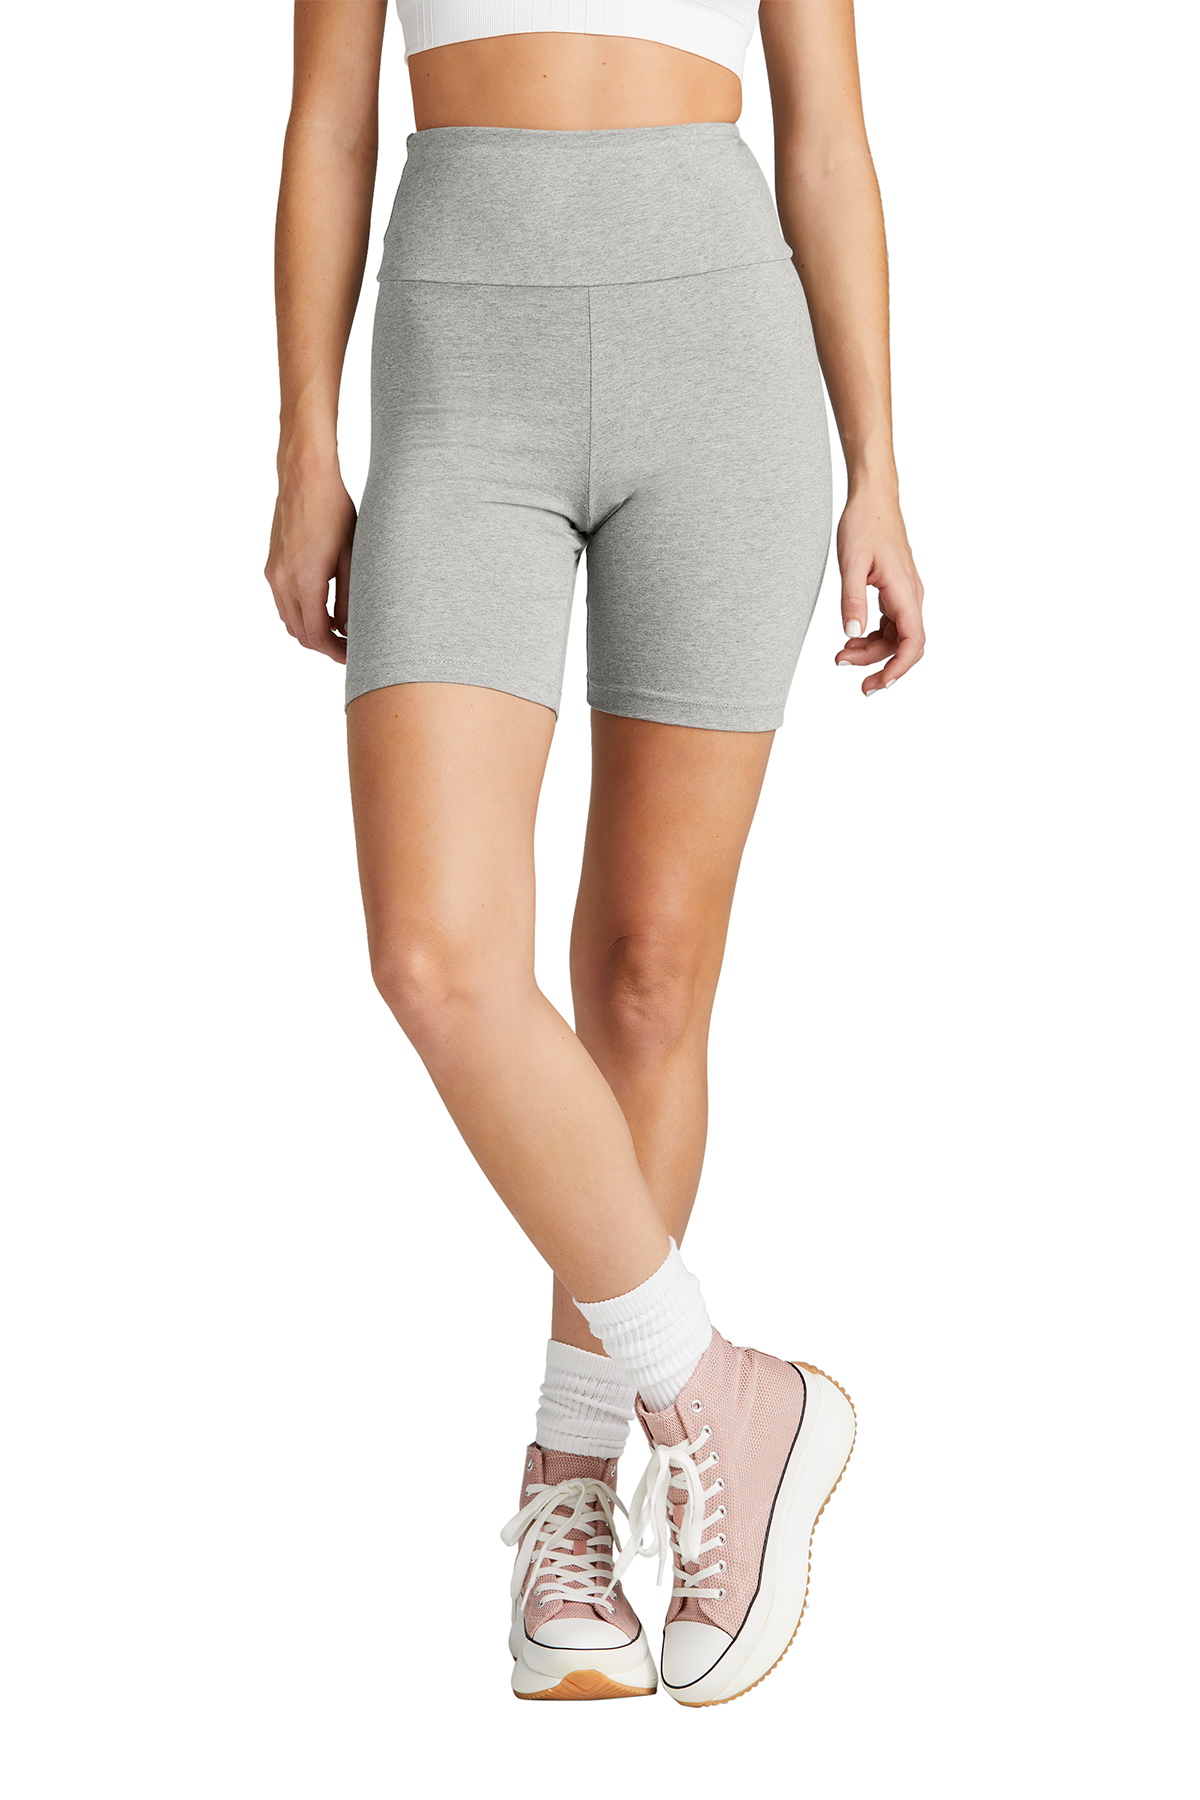 Stretch Is Comfort Women's Oh so Soft Bike Shorts